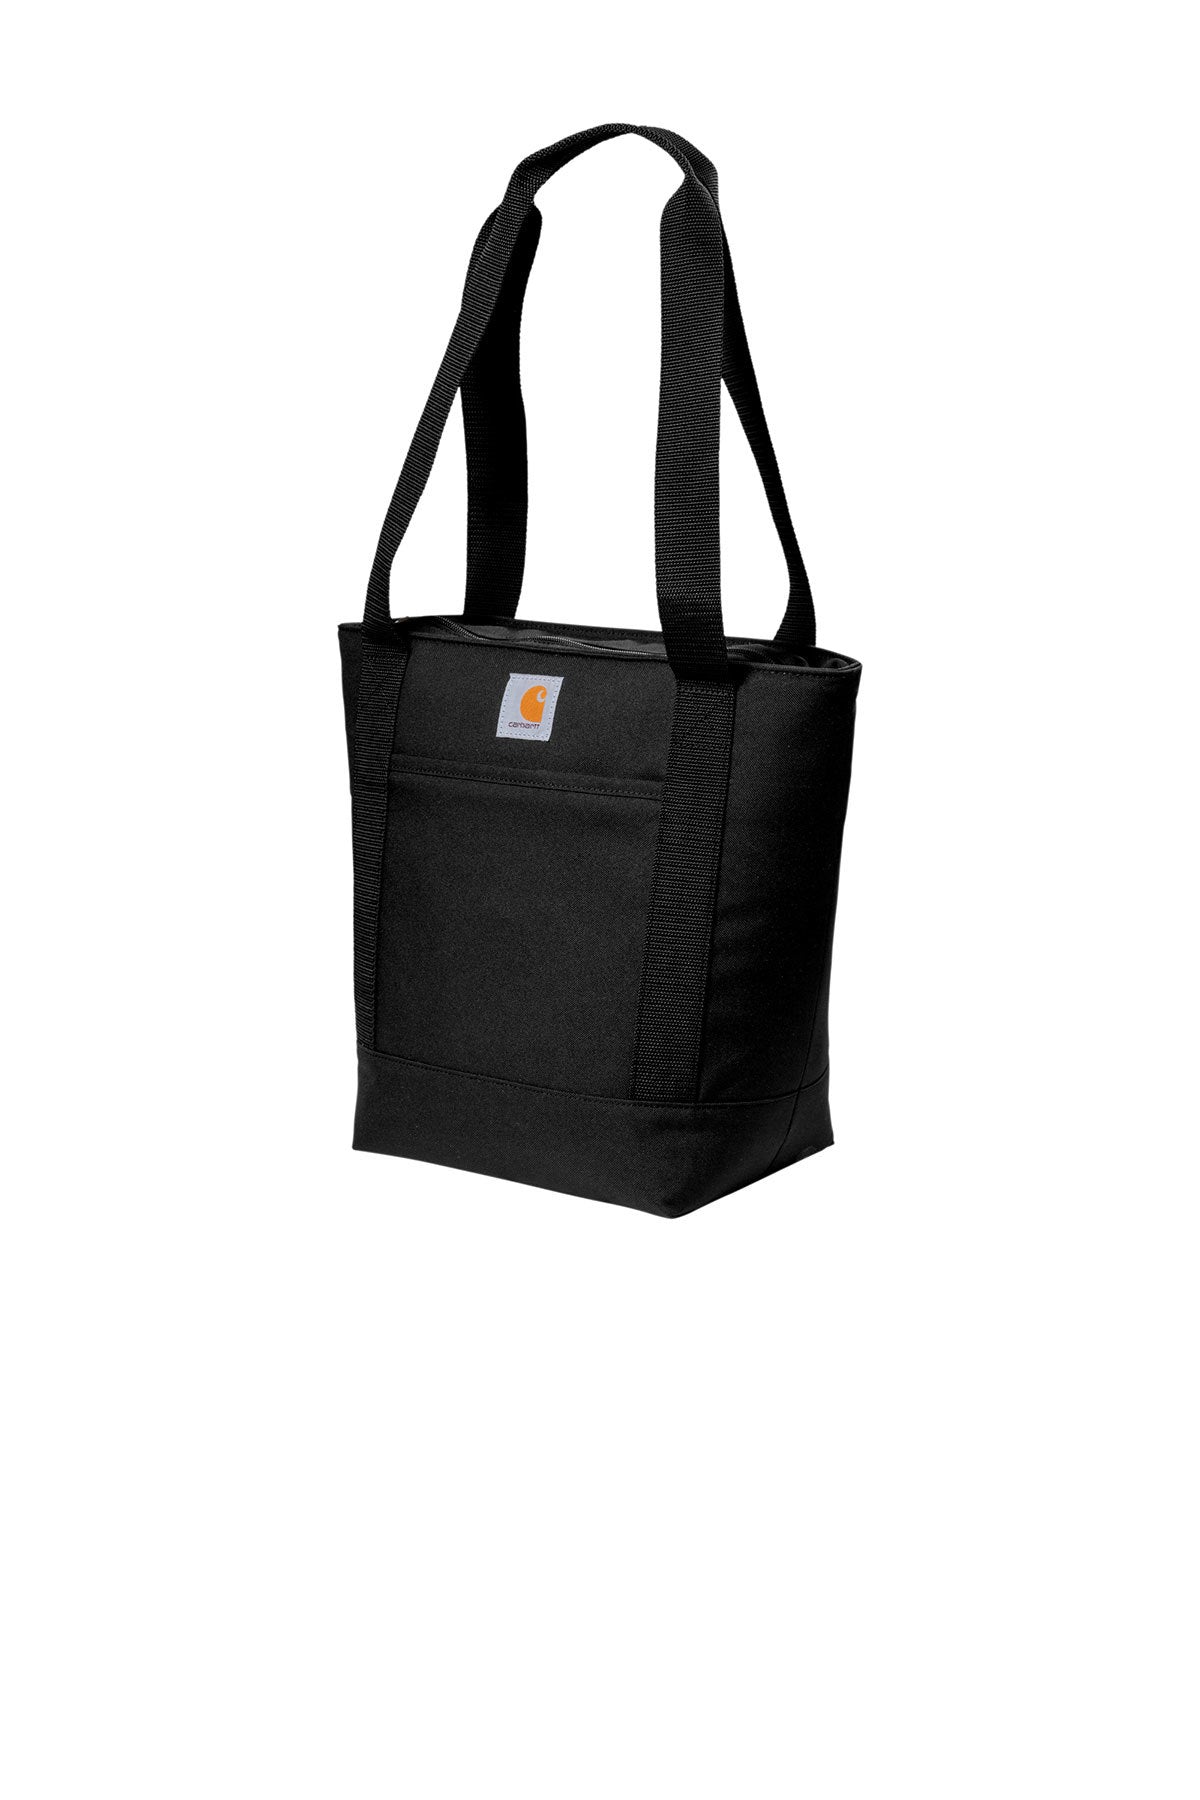 CT89101701 Carhartt® Tote 18-Can Cooler